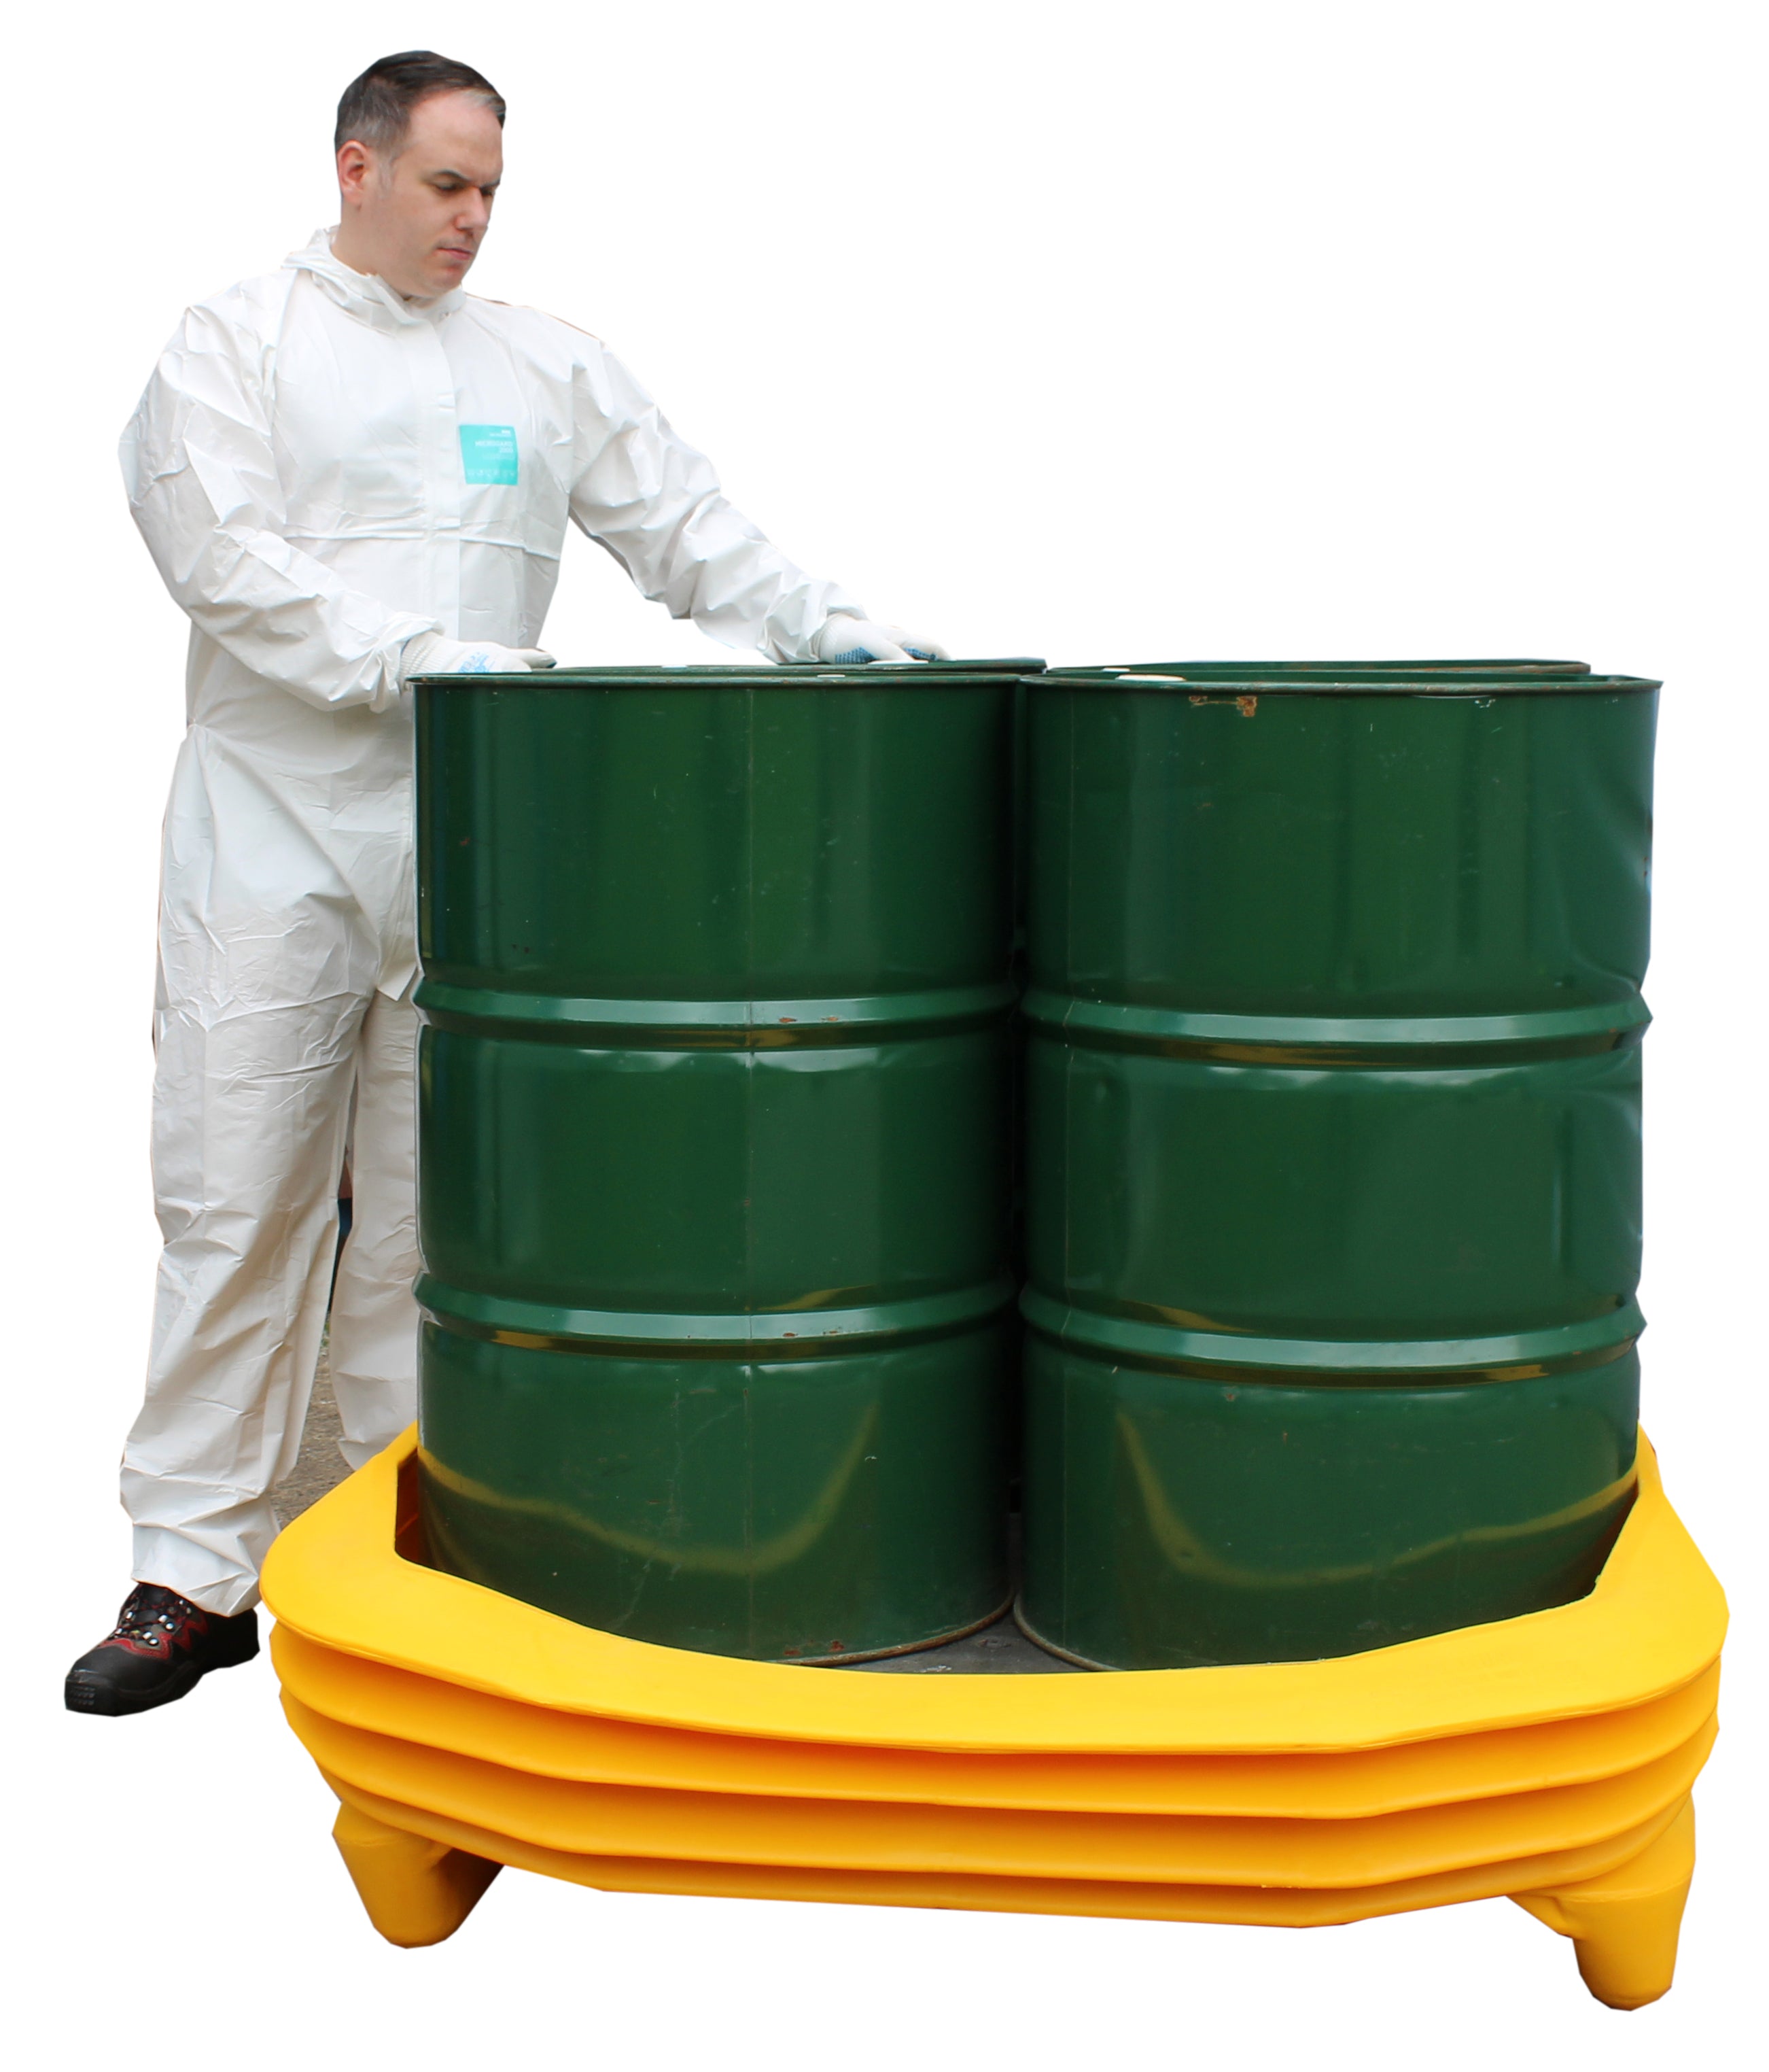 PALCON4 Pallet Converter - Converts Standard Euro Pallet into 4 Drum Bunded Spill Pallet Spill Pallet > Drum Storage > Spill Containment > Spill Control > Romold > One Stop For Safety   